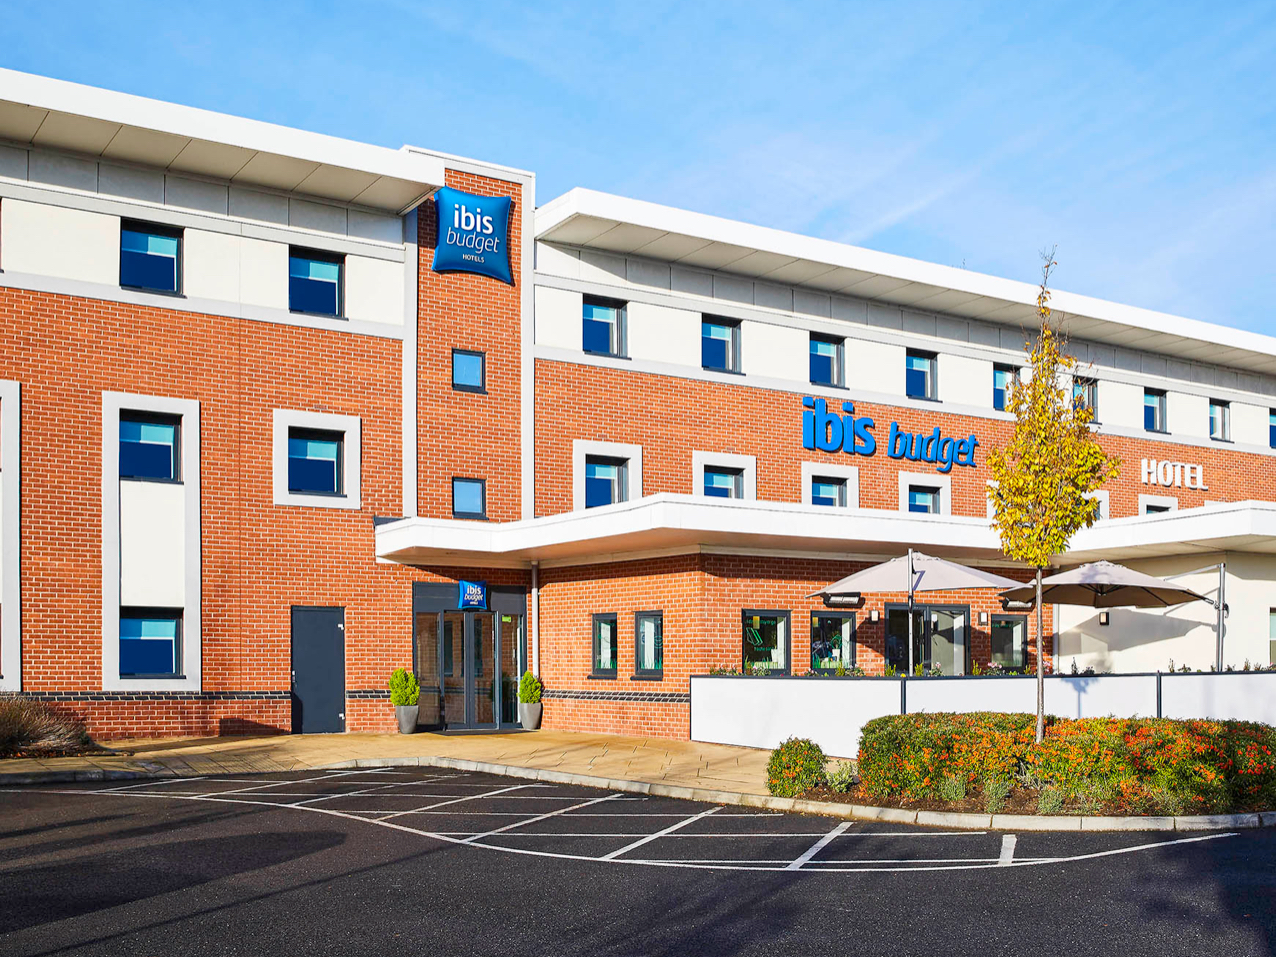 Ibis Budget Hotel Leicester1